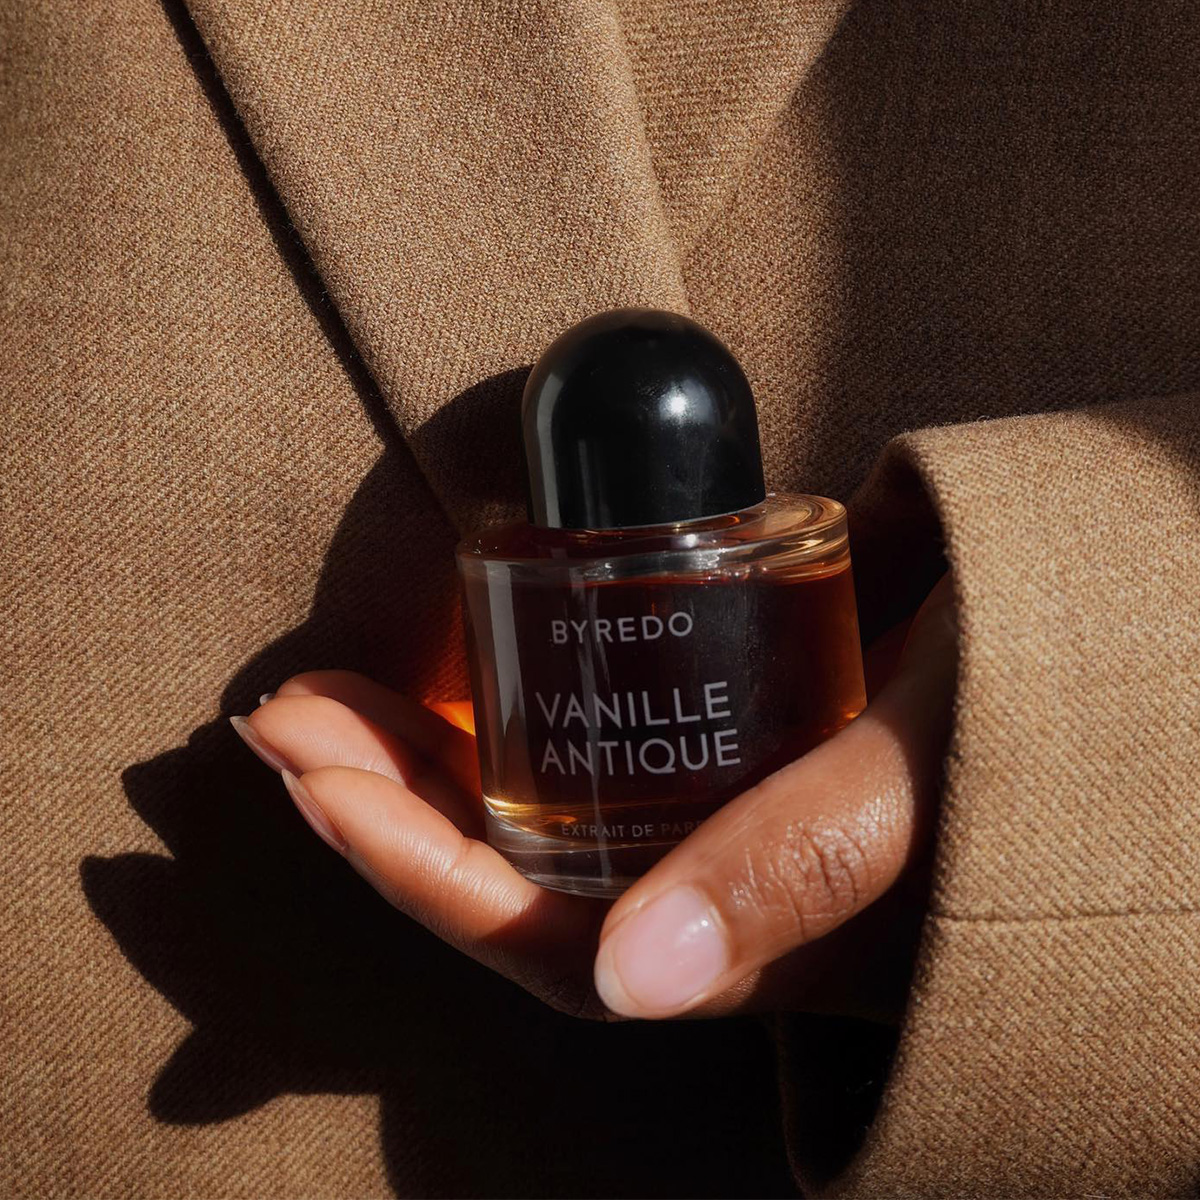 Zara Just Dropped 7 Expensive-Smelling Fragrance Edits That Could Easily Pass For Designer